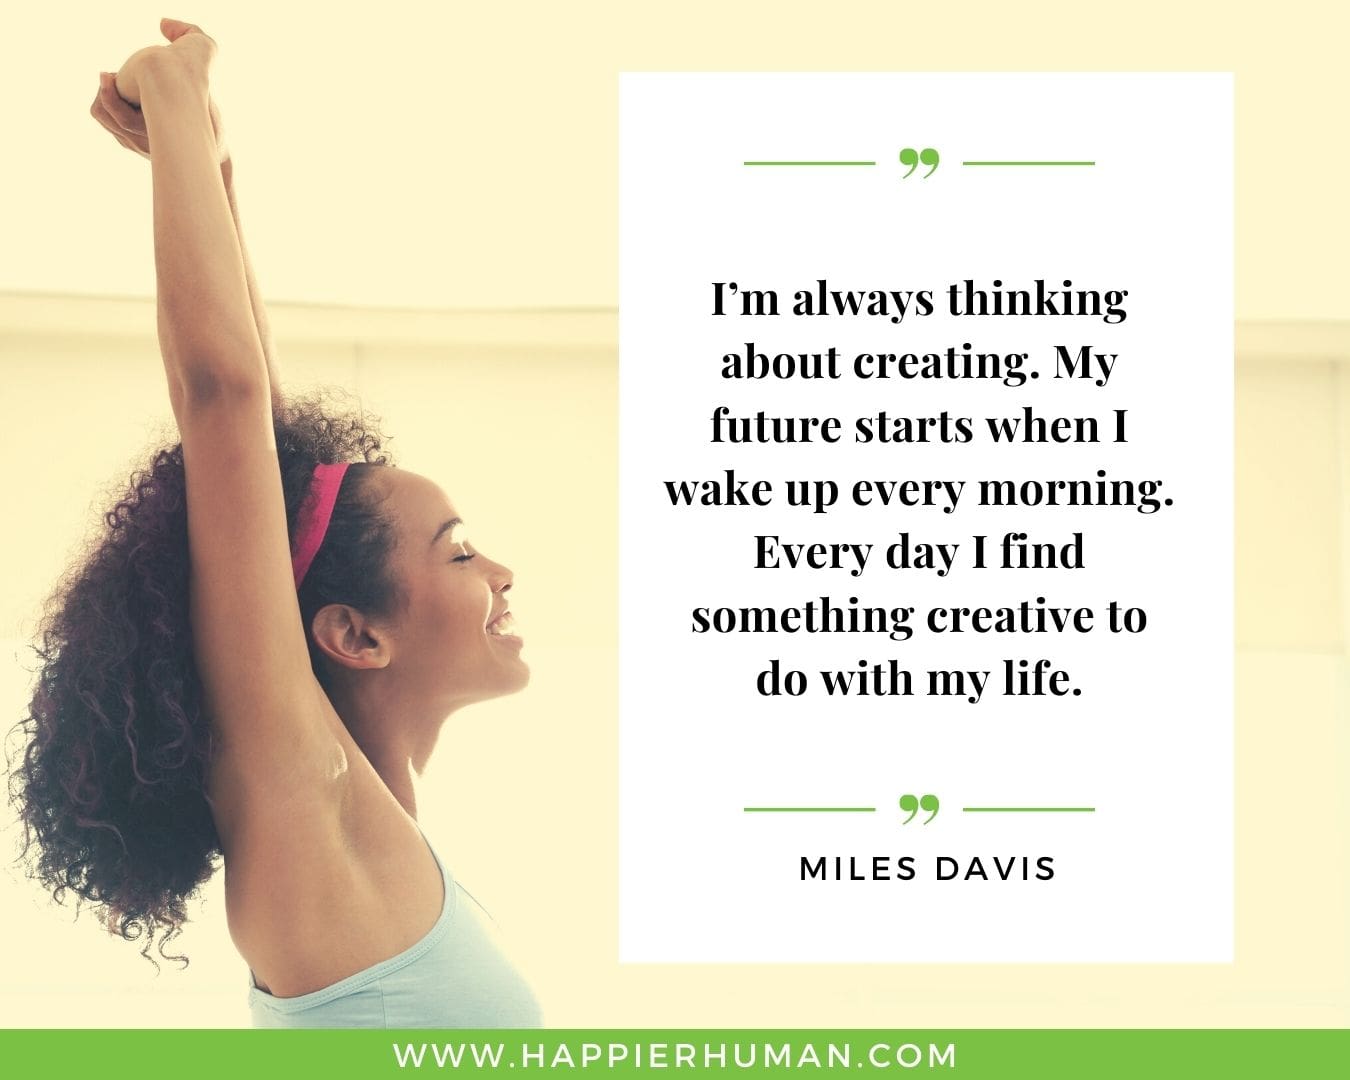 Great Day Quotes - “I’m always thinking about creating. My future starts when I wake up every morning. Every day I find something creative to do with my life.” – Miles Davis